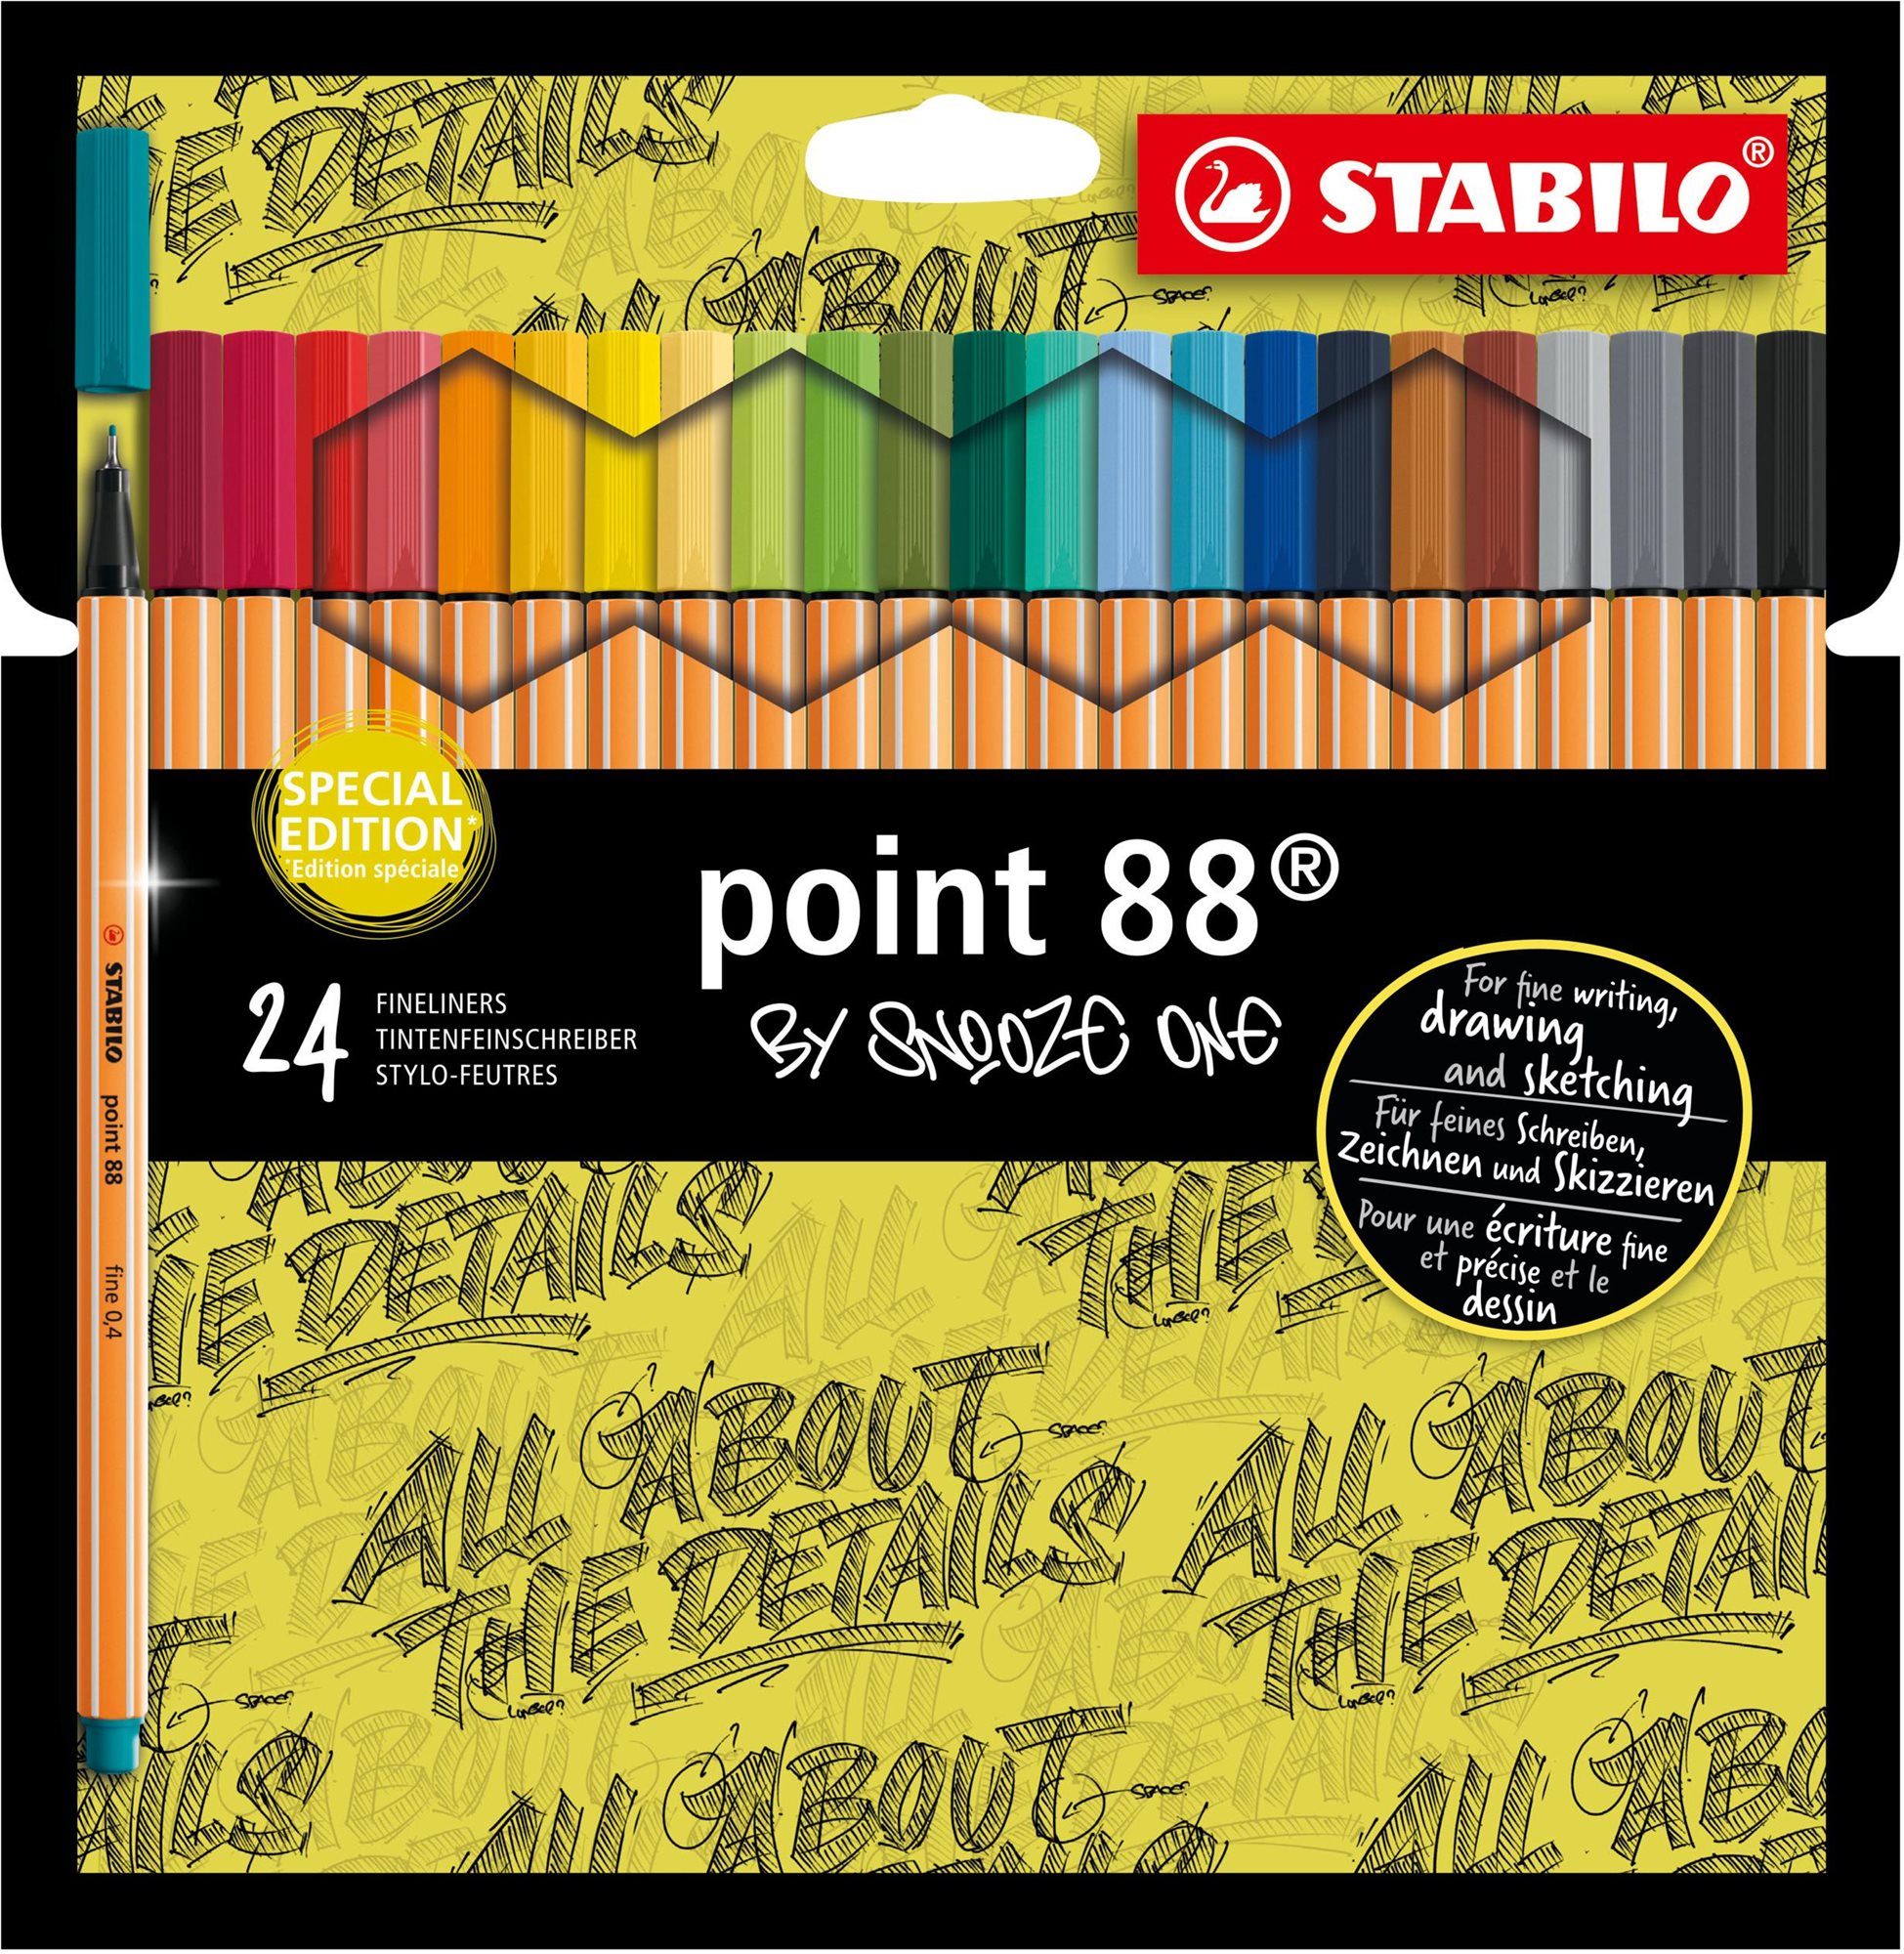 Liner STABILO point 88 Snooze One Edition 24 db